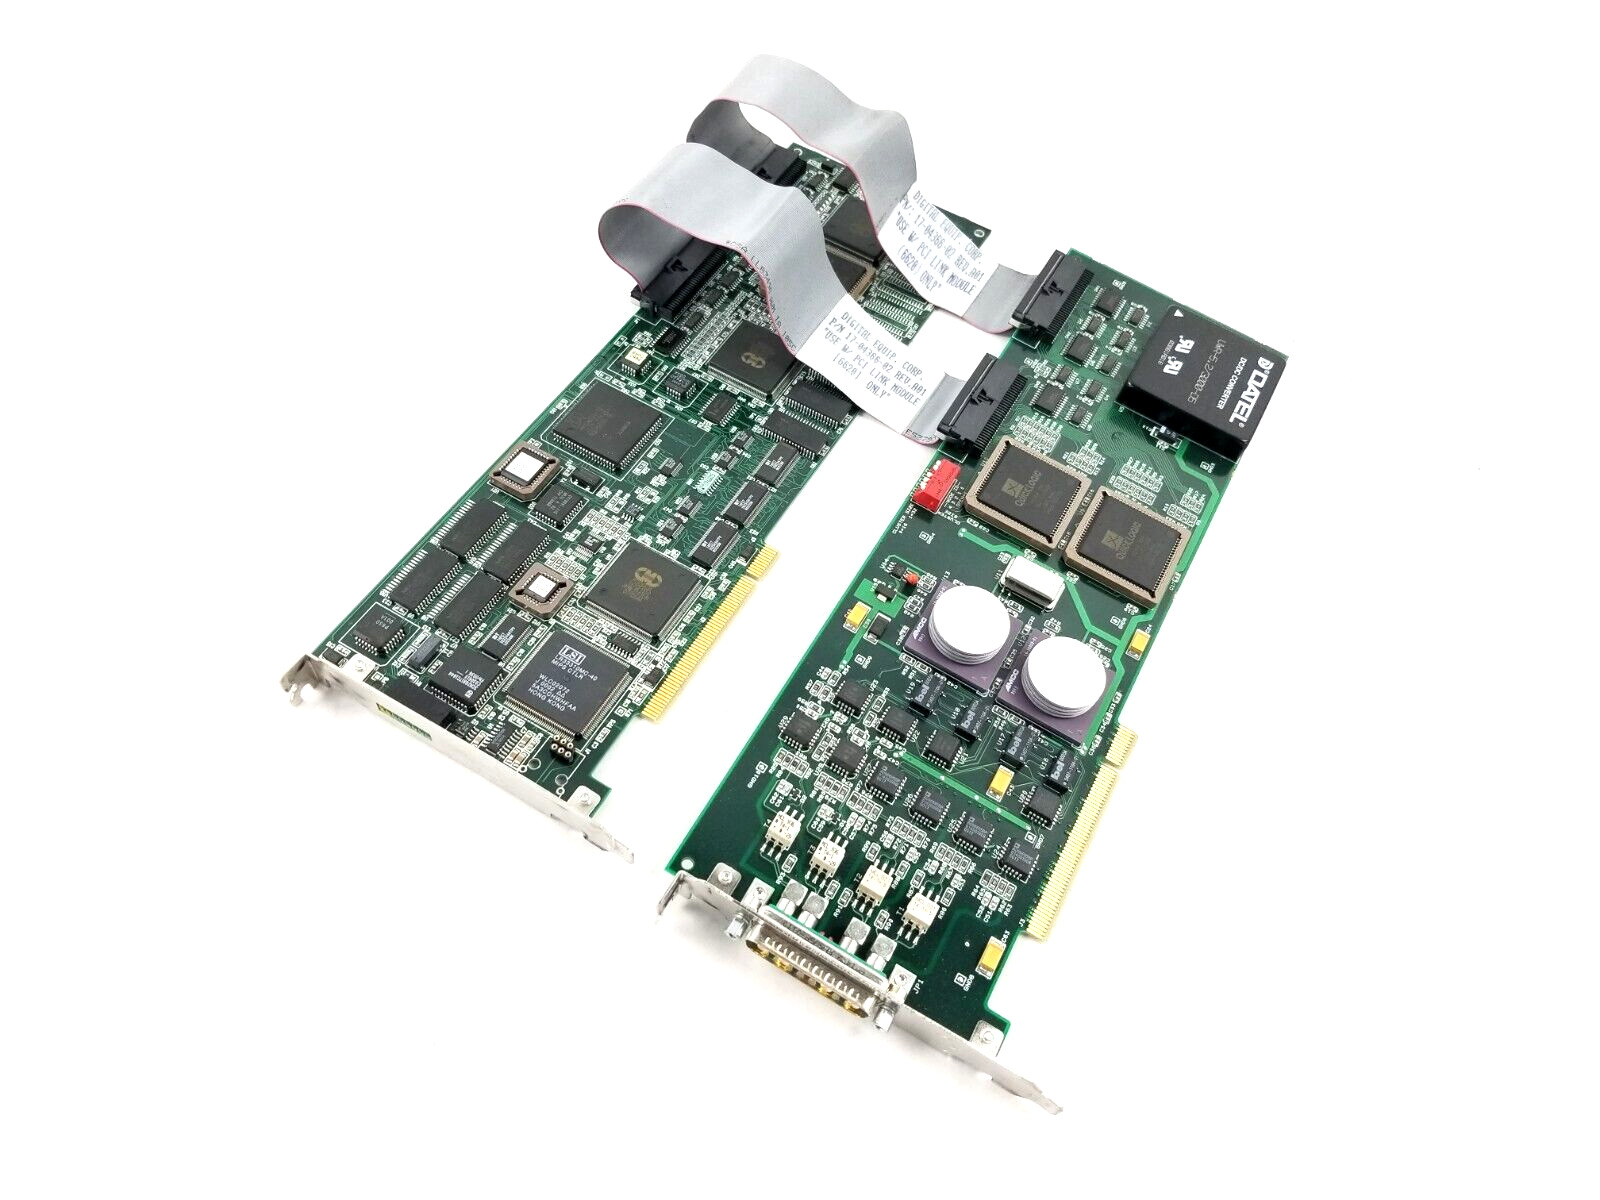 DEC DIGITAL 30-46980-03 PCX-6620-000 PCI TO CI With 30-46980-02 With Cables